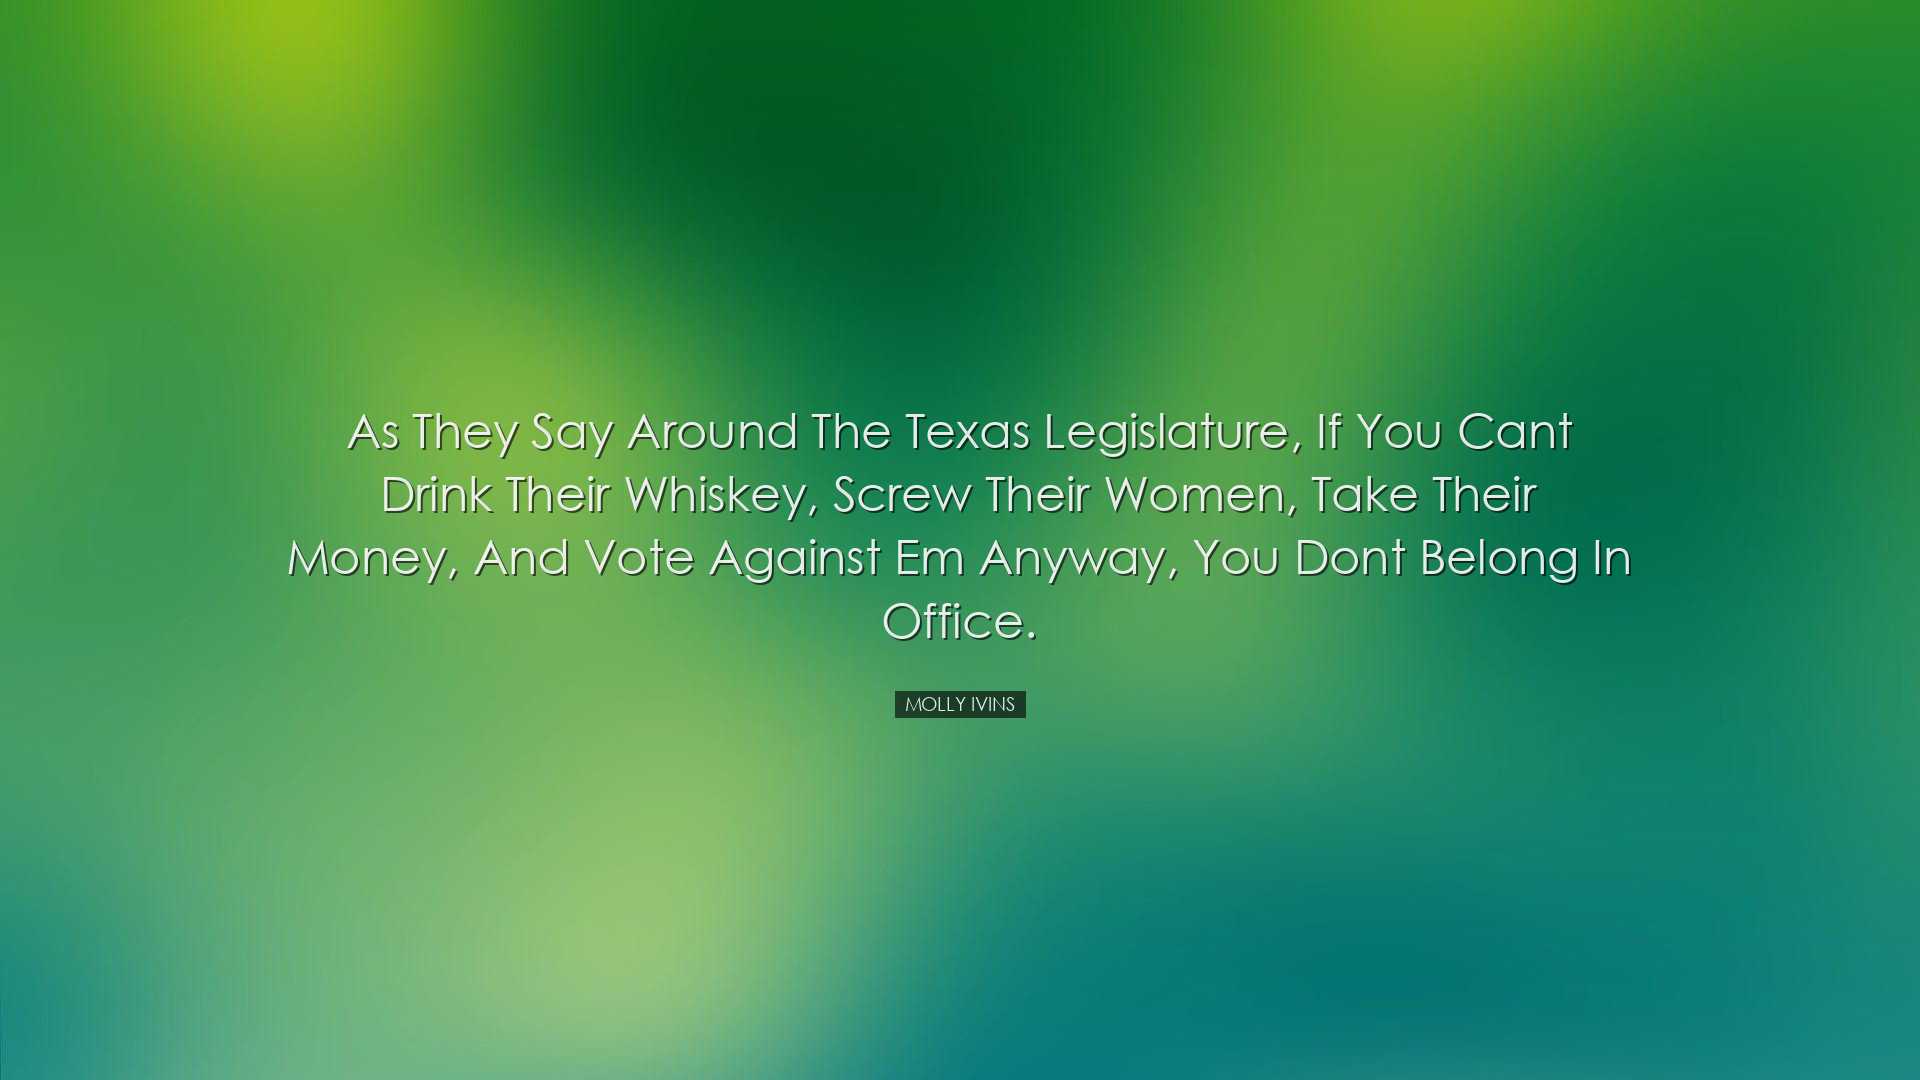 As they say around the Texas Legislature, if you cant drink their